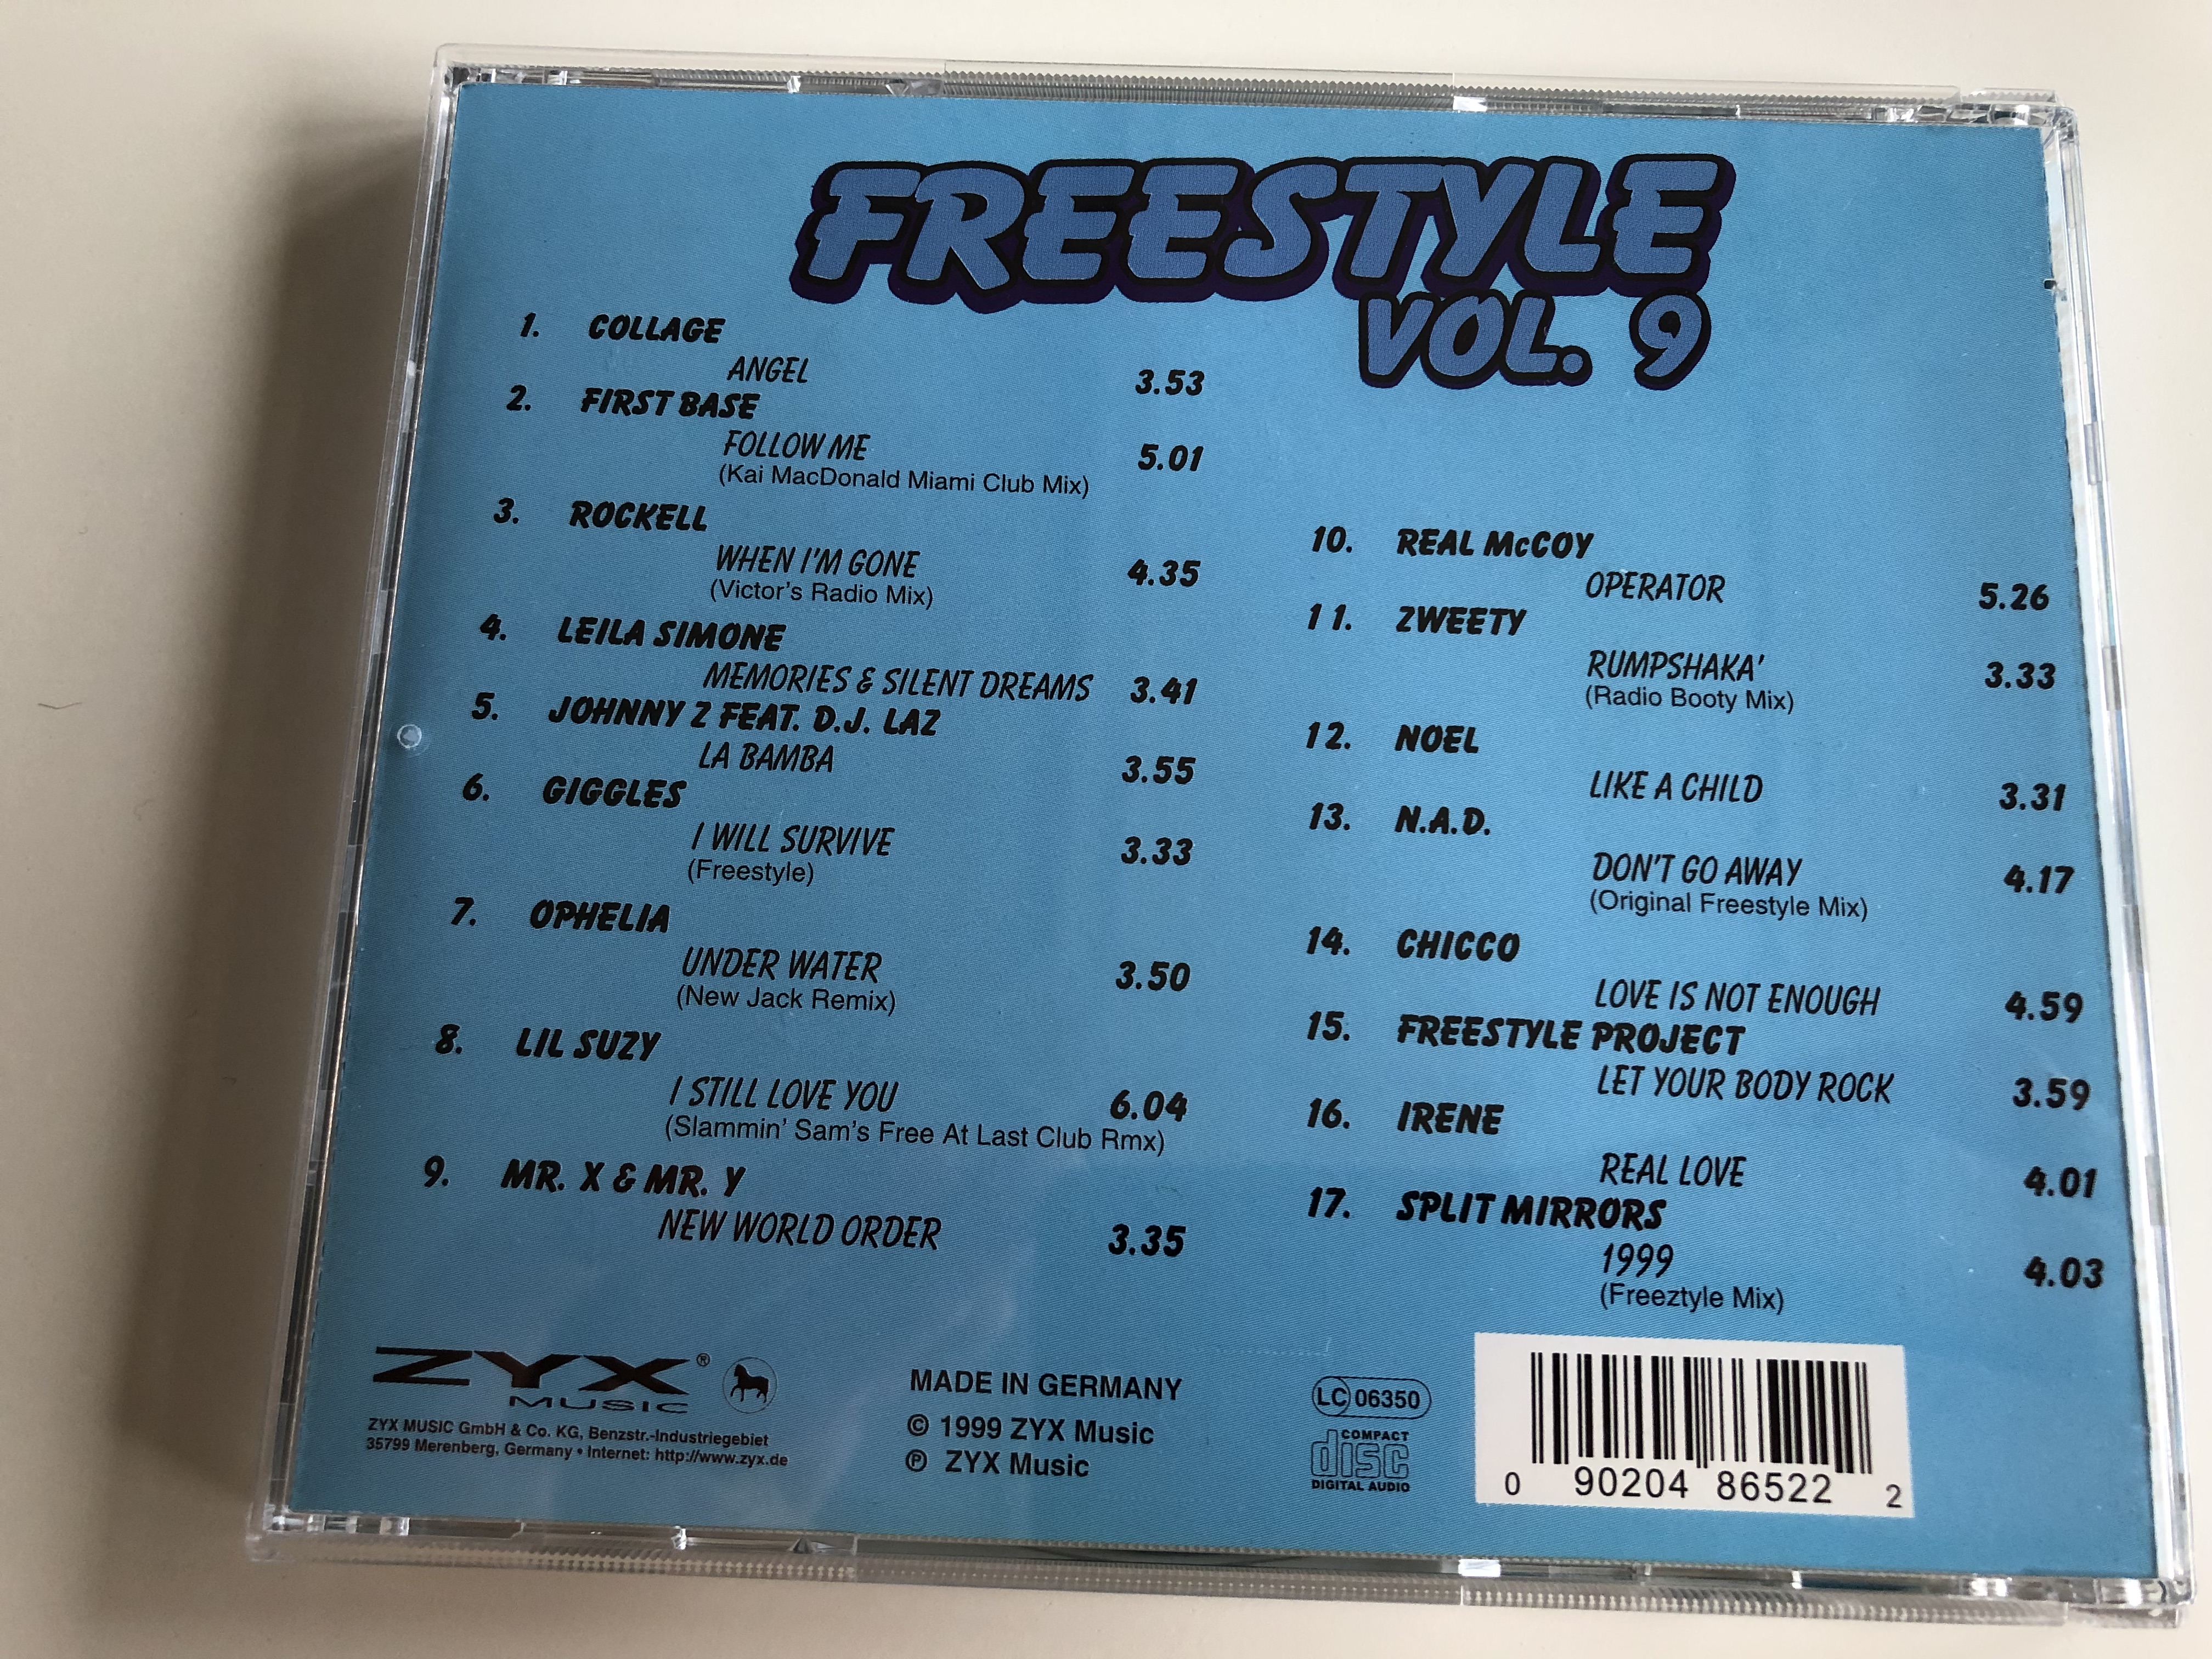 freestyle-vol.-9-johnny-z-collage-mr.-x-mr.-y-lil-suzy-giggles-leila-simone...-and-more-zyx-music-audio-cd-1999-zyx-55163-2-3-.jpg